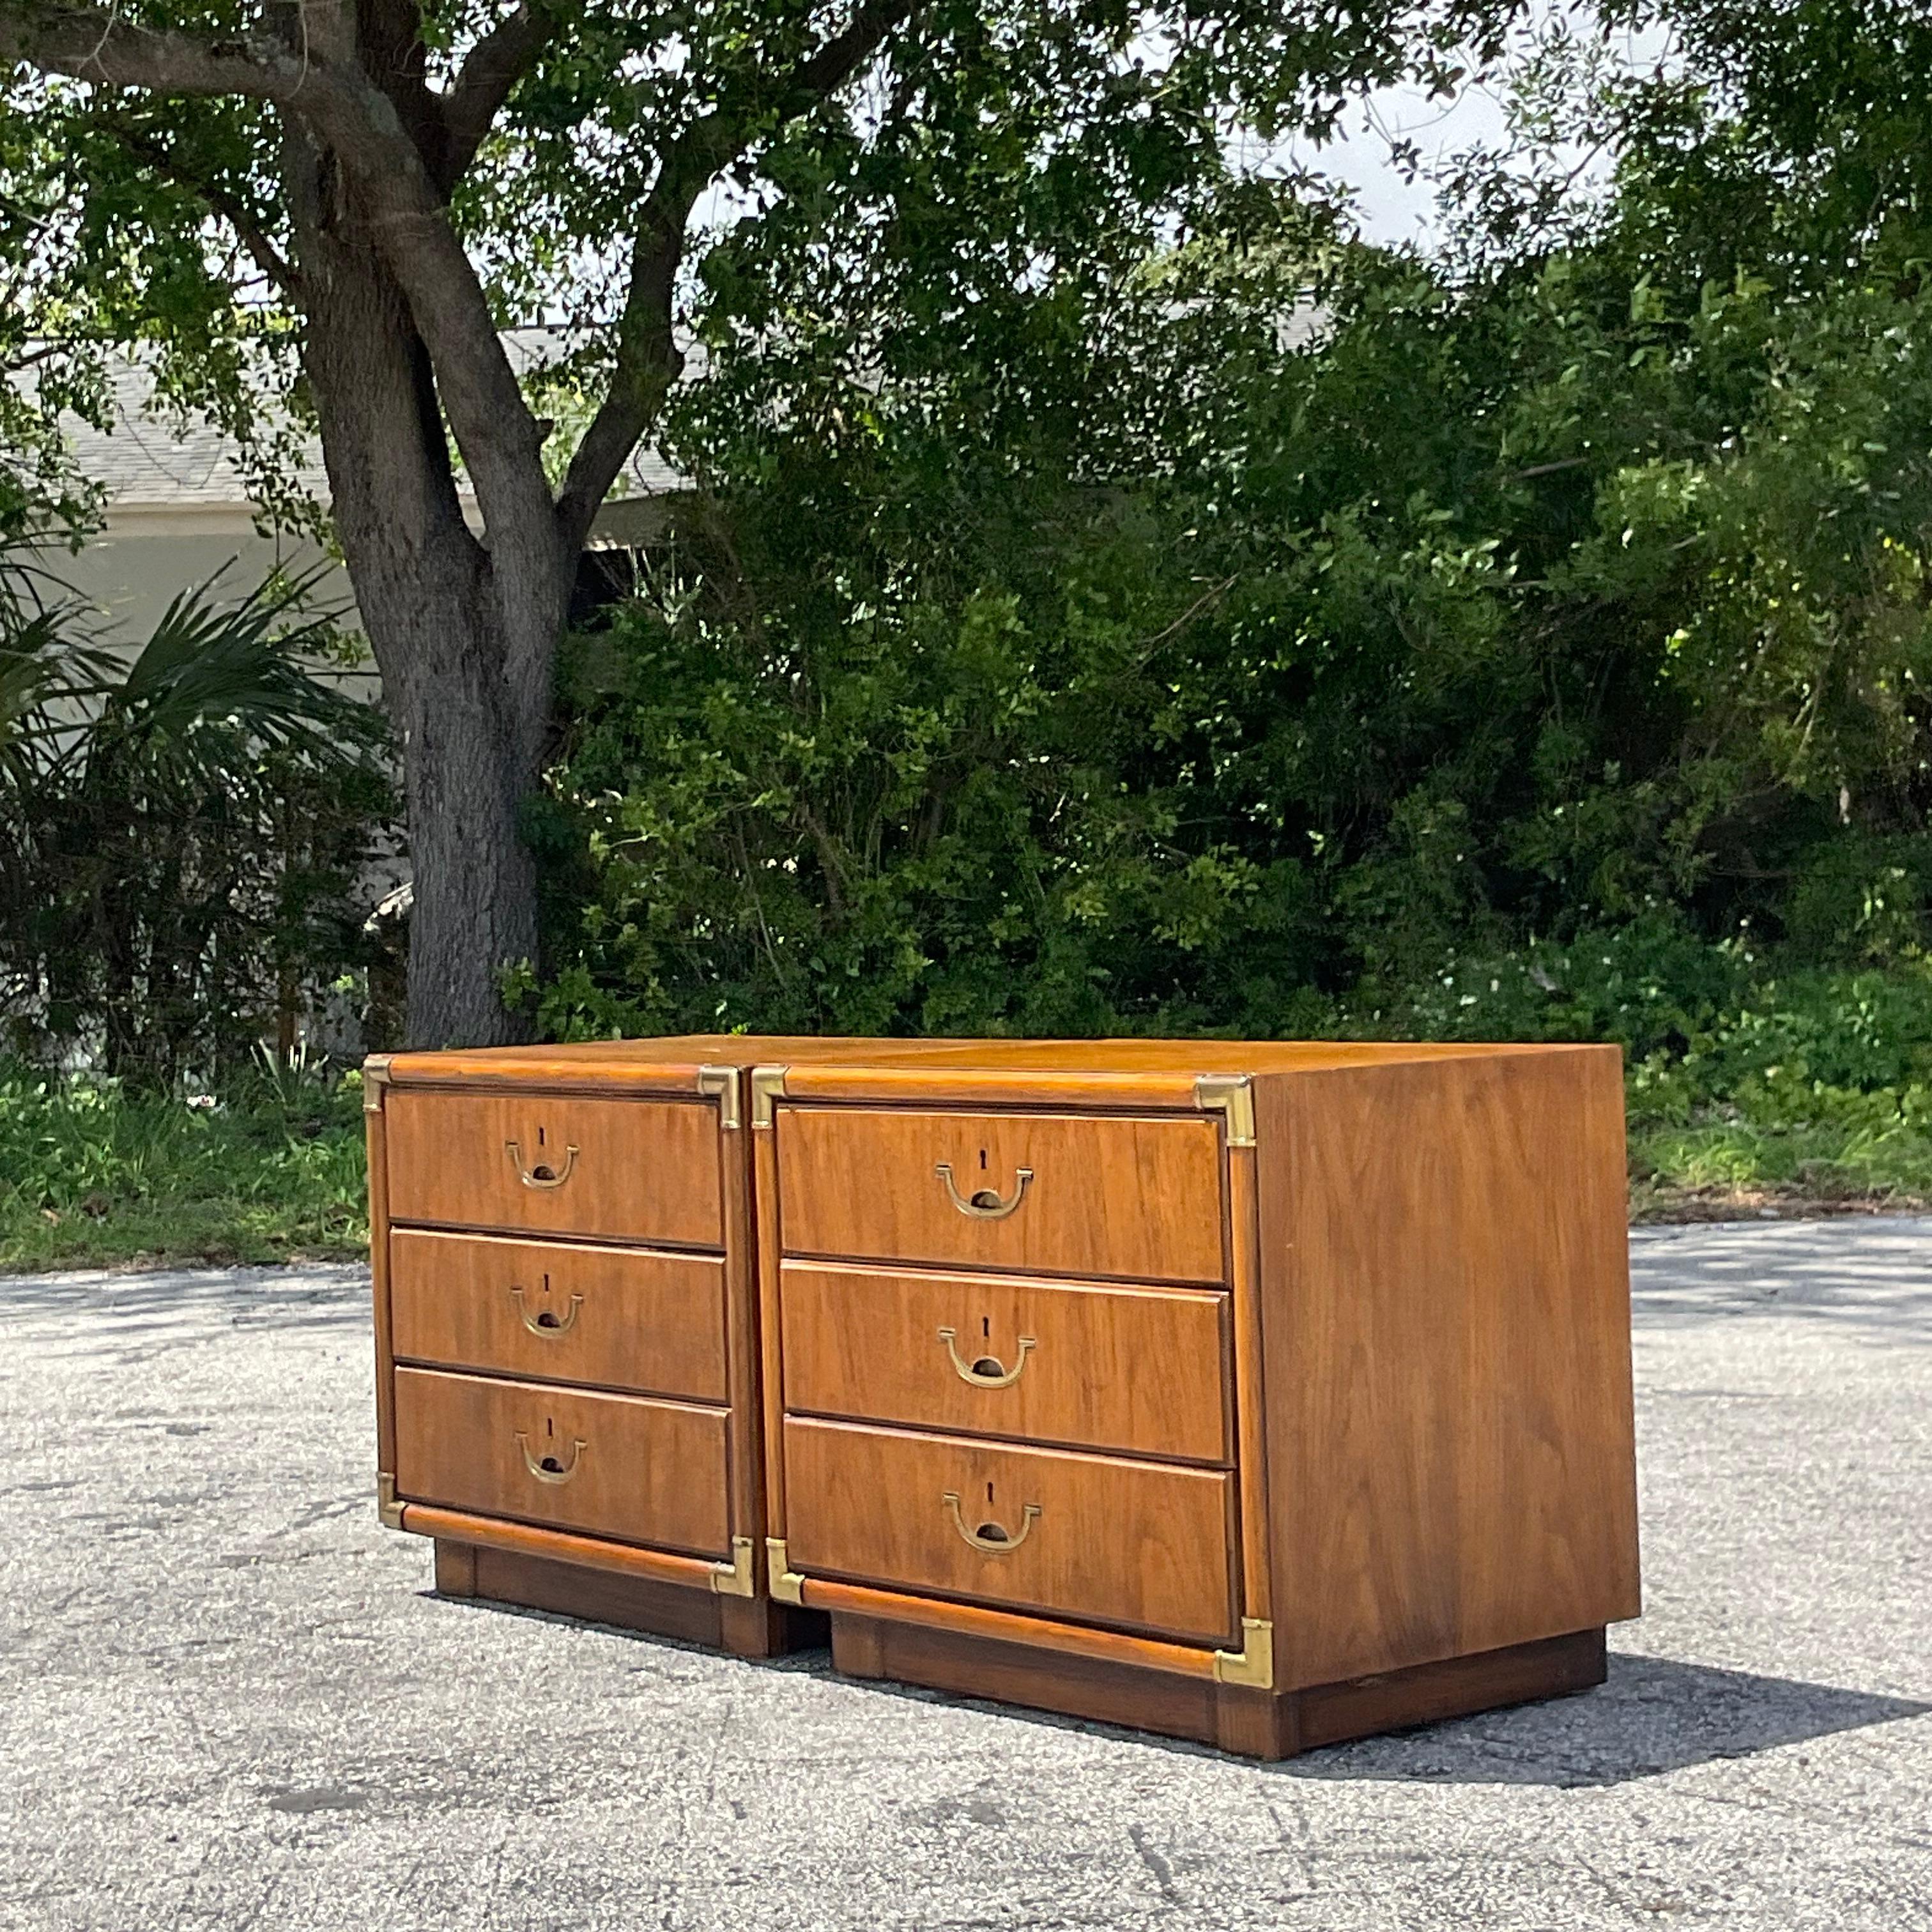 Mid-Century Modern 1980s Vintage Boho Drexel Campaign Nightstands - a Pair For Sale